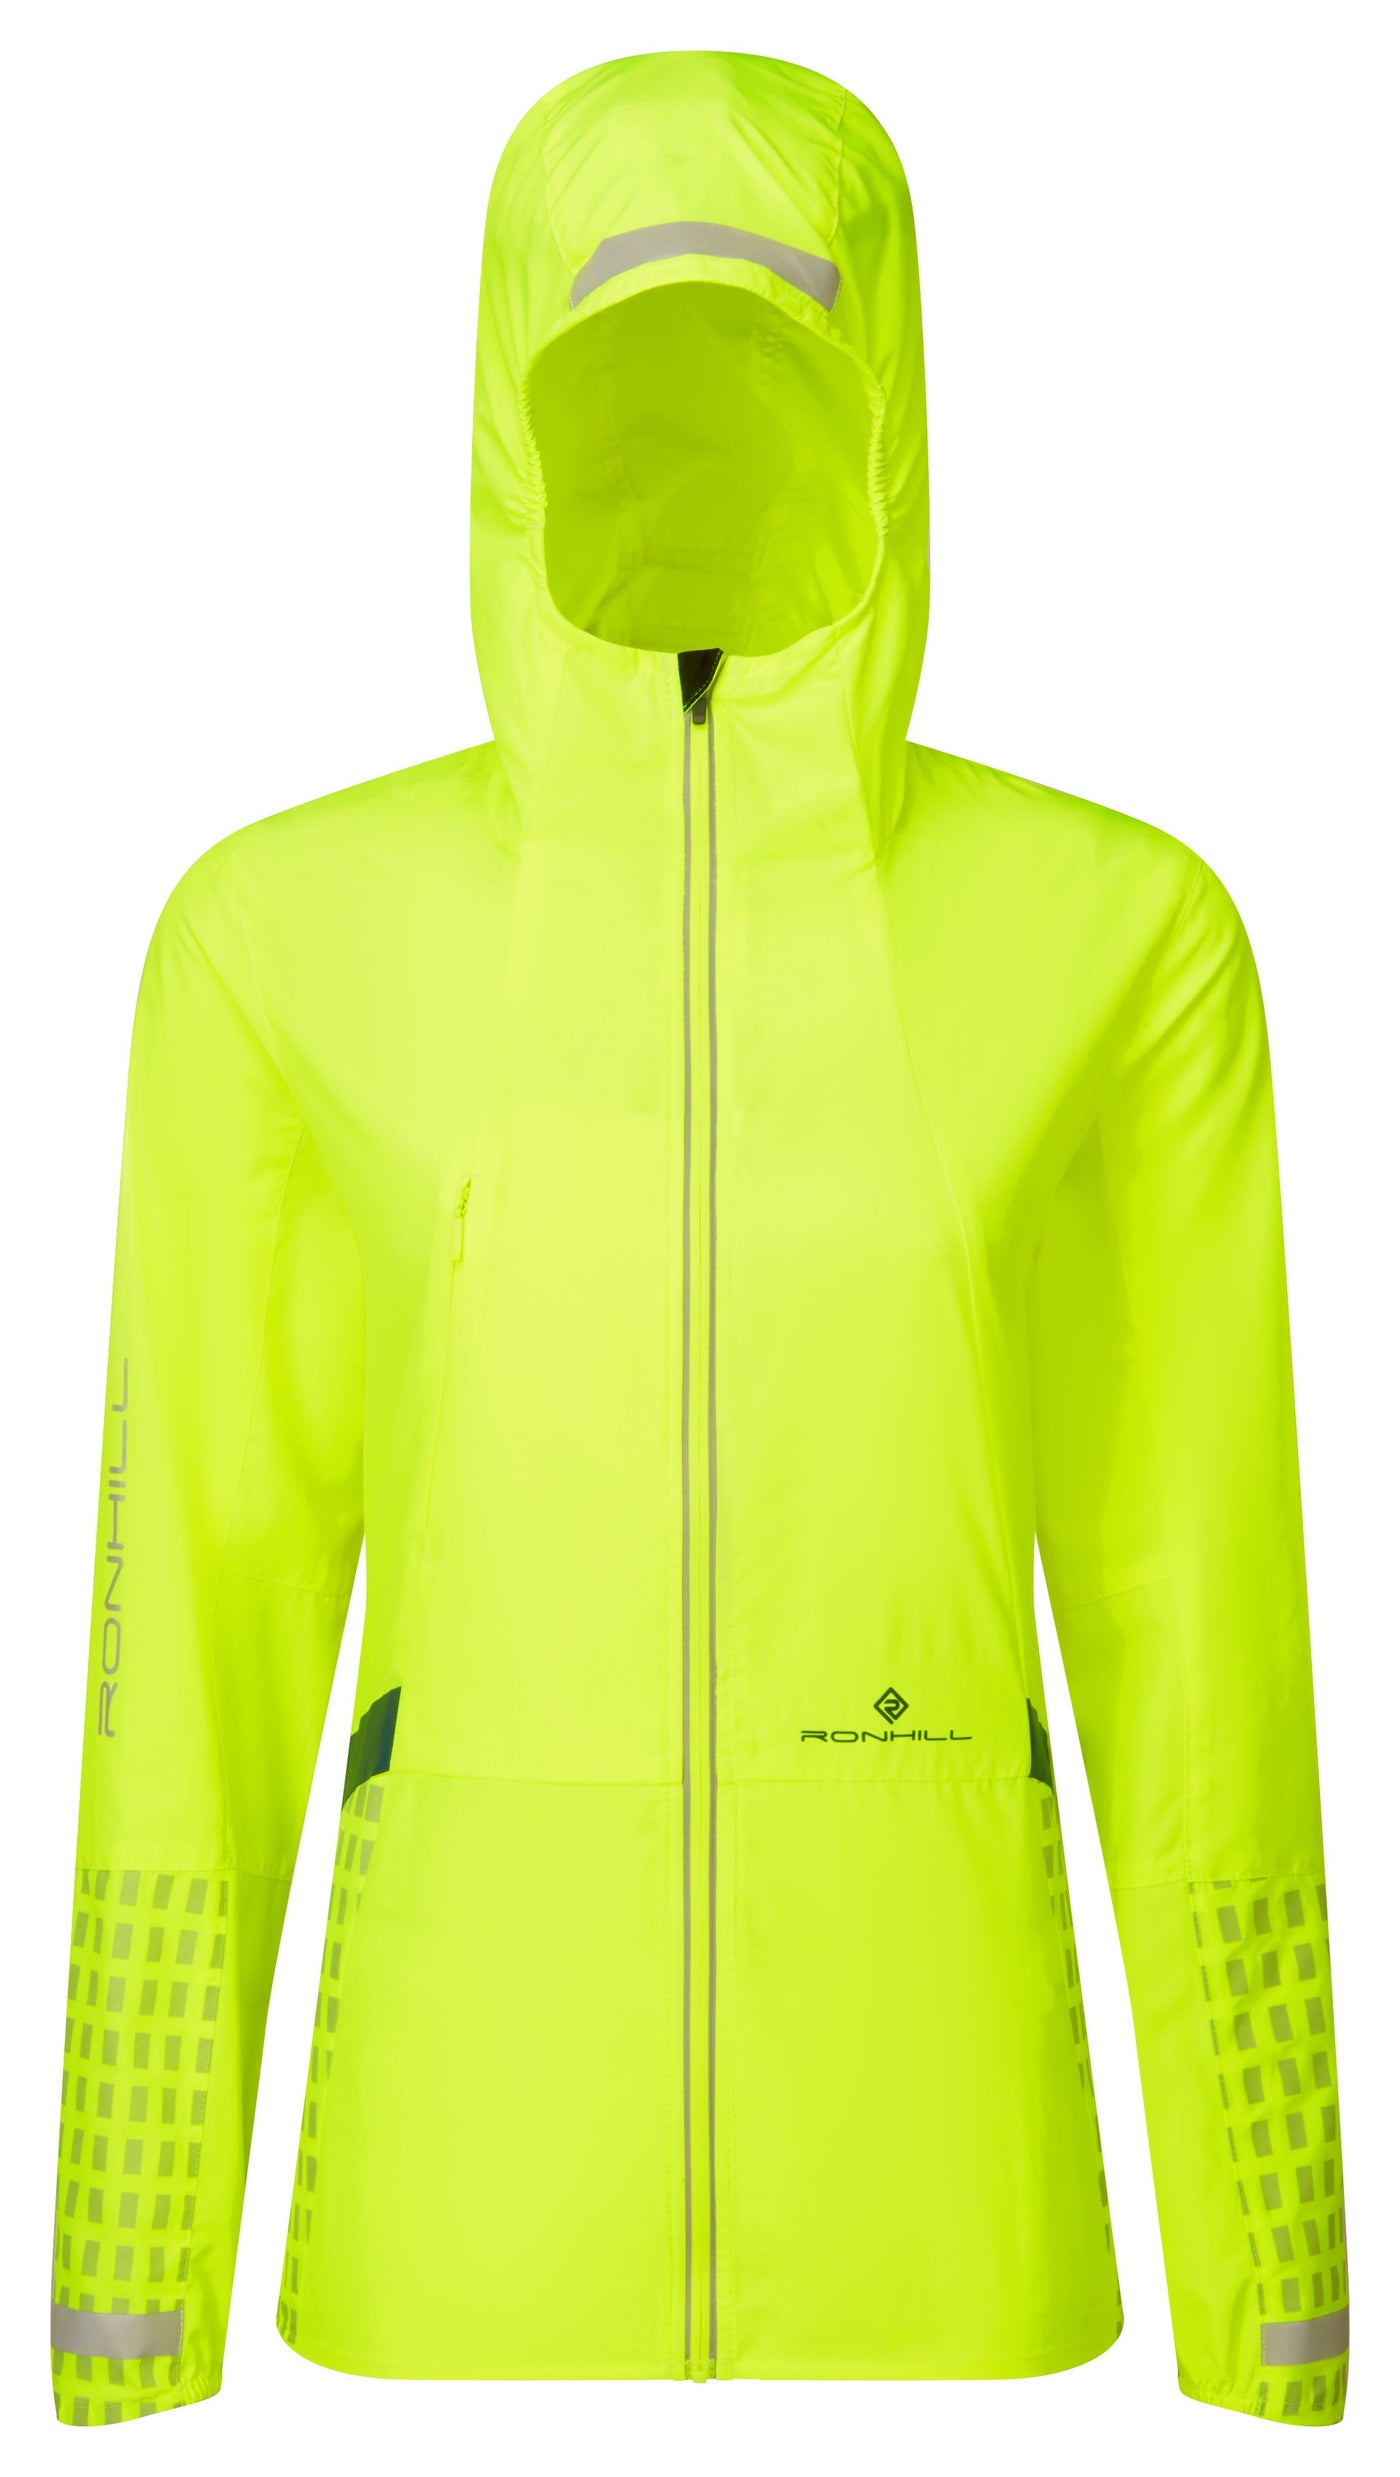 RonHill Womens Tech Afterhours Jacket - Fluo Yellow/Charcoal/Reflect